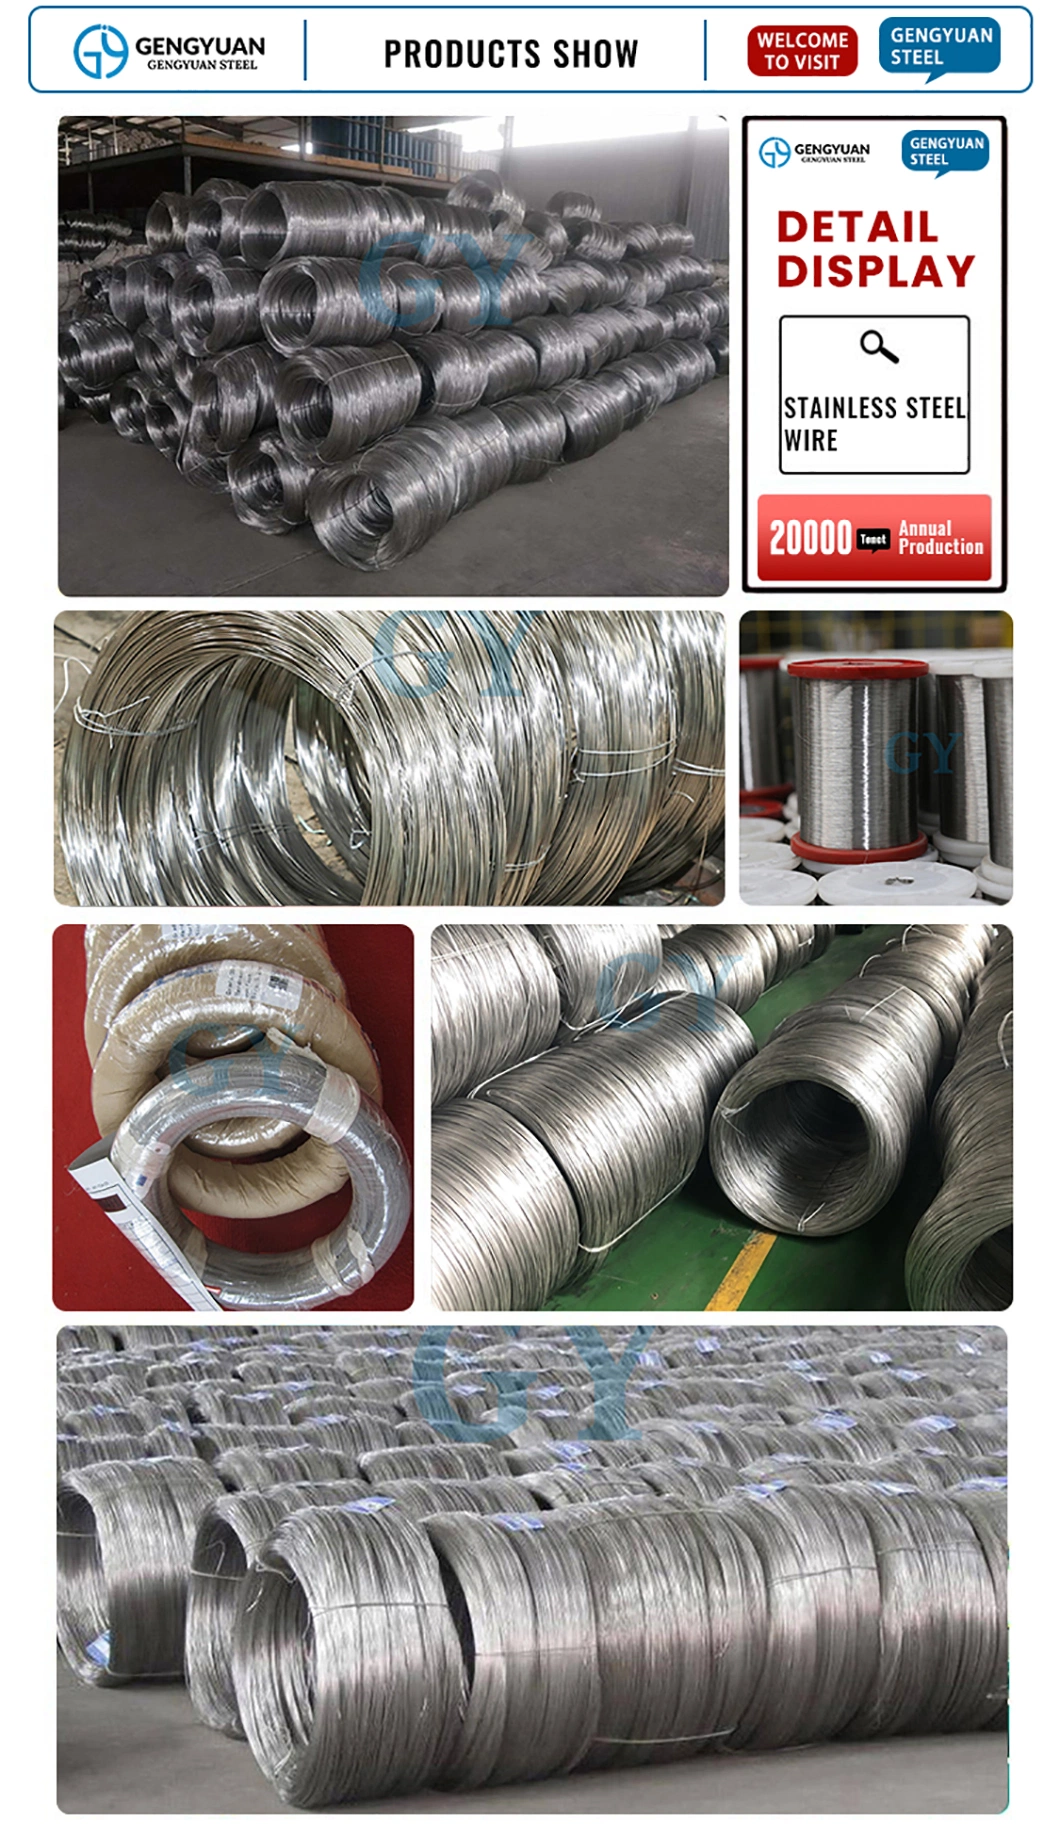 China High Quality Manufacture of AISI 316L Stainless Steel Wire for Sale